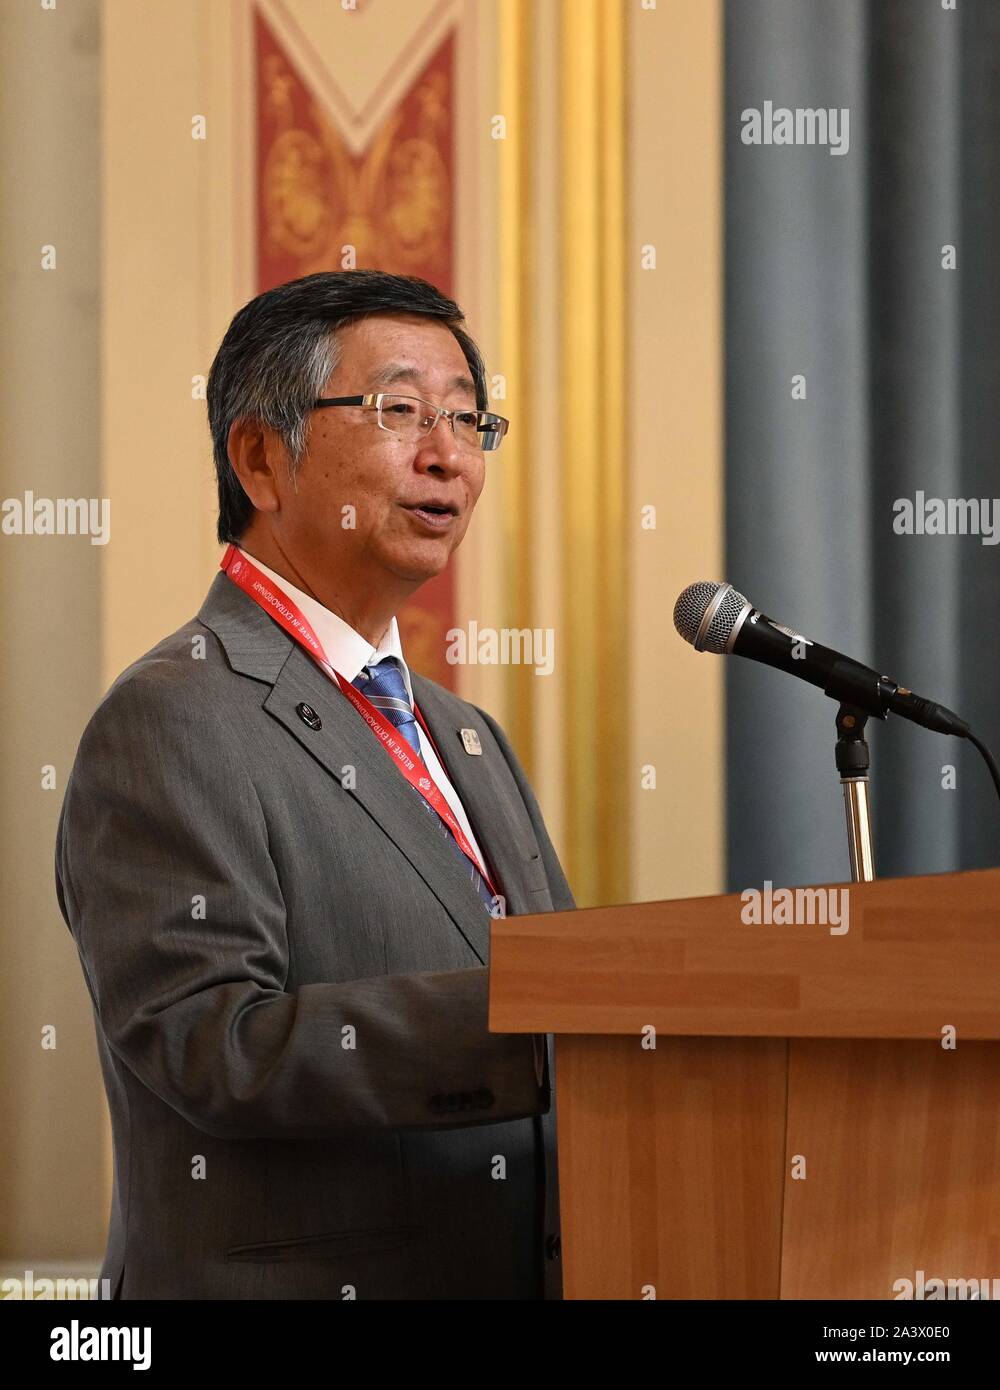 Westminster. United Kingdom. 10 October 2019. Koji Tsuruoka (Japanese ambassador to the United Kingdom) addresses the athgletes from the 1964 Tokyo games. TeamGB announce the Canoe athletes for the Tokyo 2020 Olympics. Foreign and Commonwealth Office. Westminster. London. United Kingdom. Credit Garry Bowden/Sport in Pictures/Alamy Live News. Stock Photo